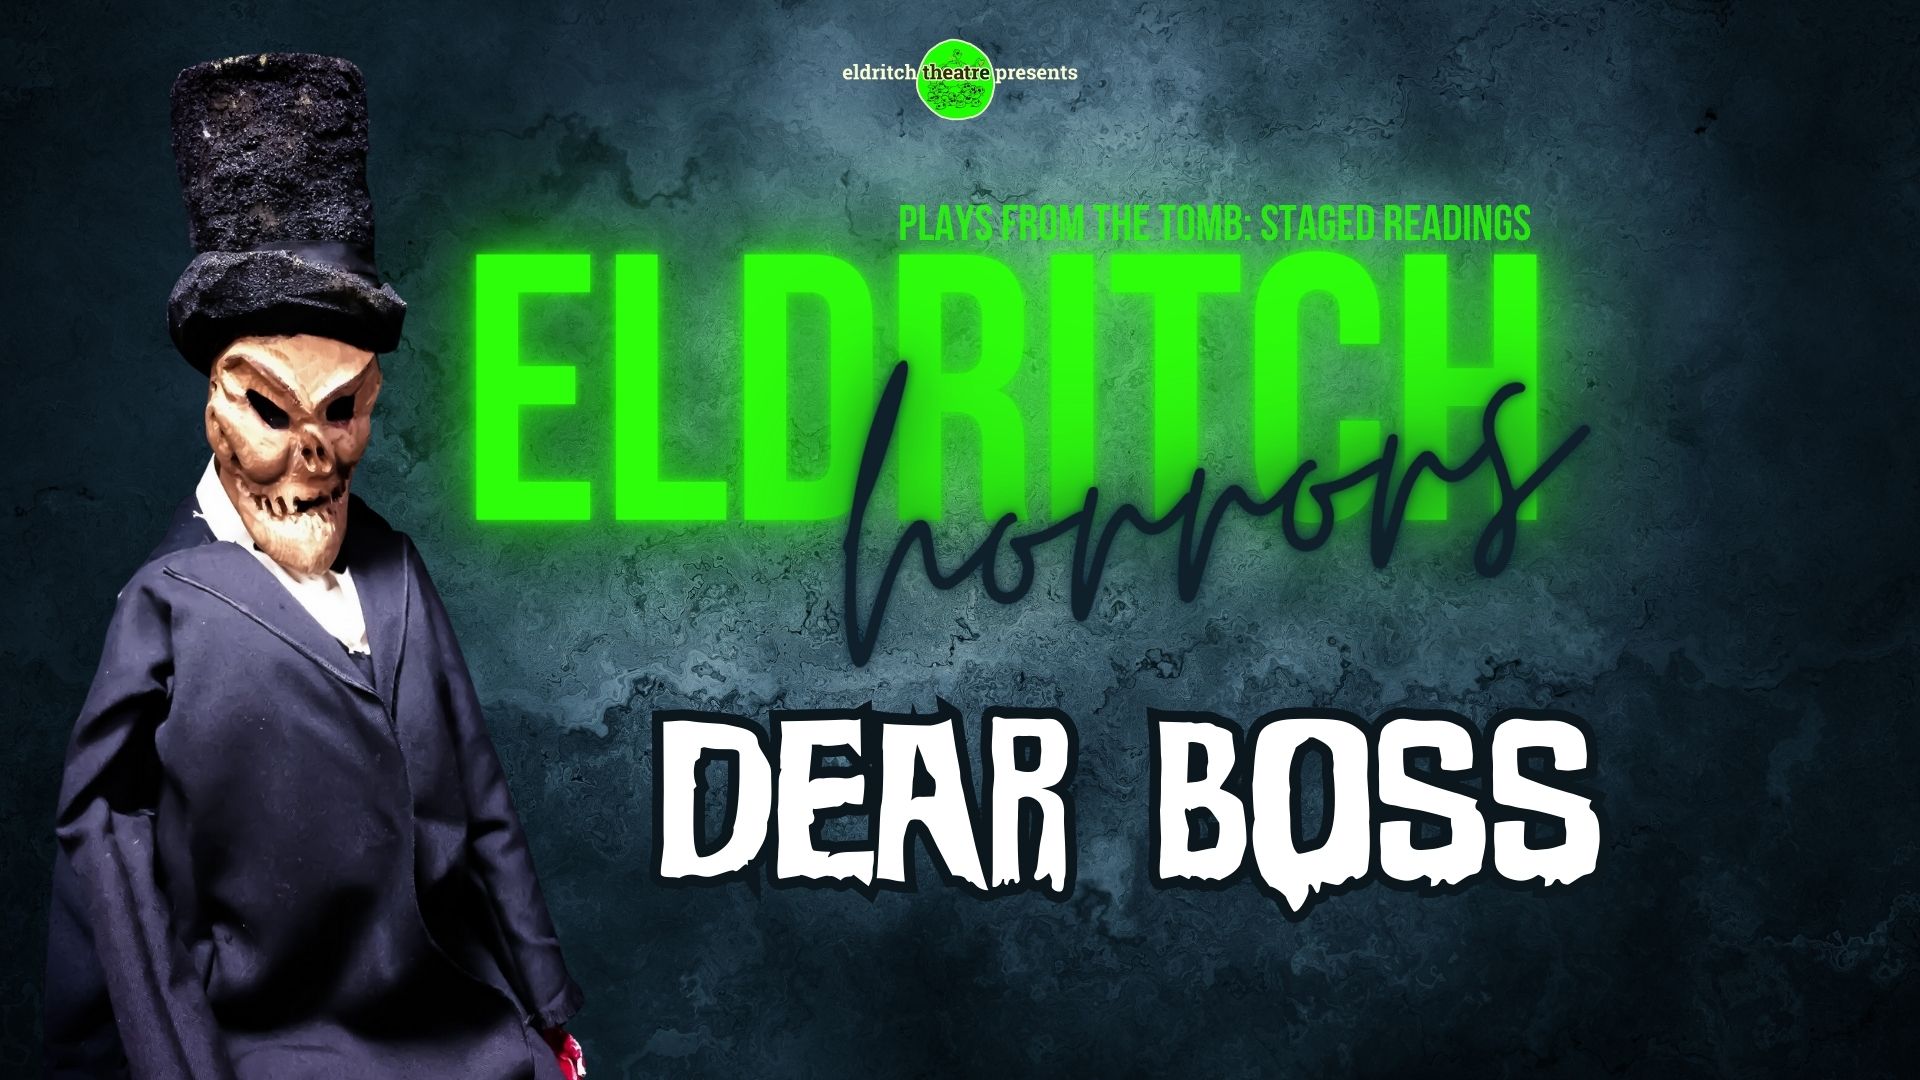 Eldritch Horrors: Plays From The Tomb DEAR BOSS